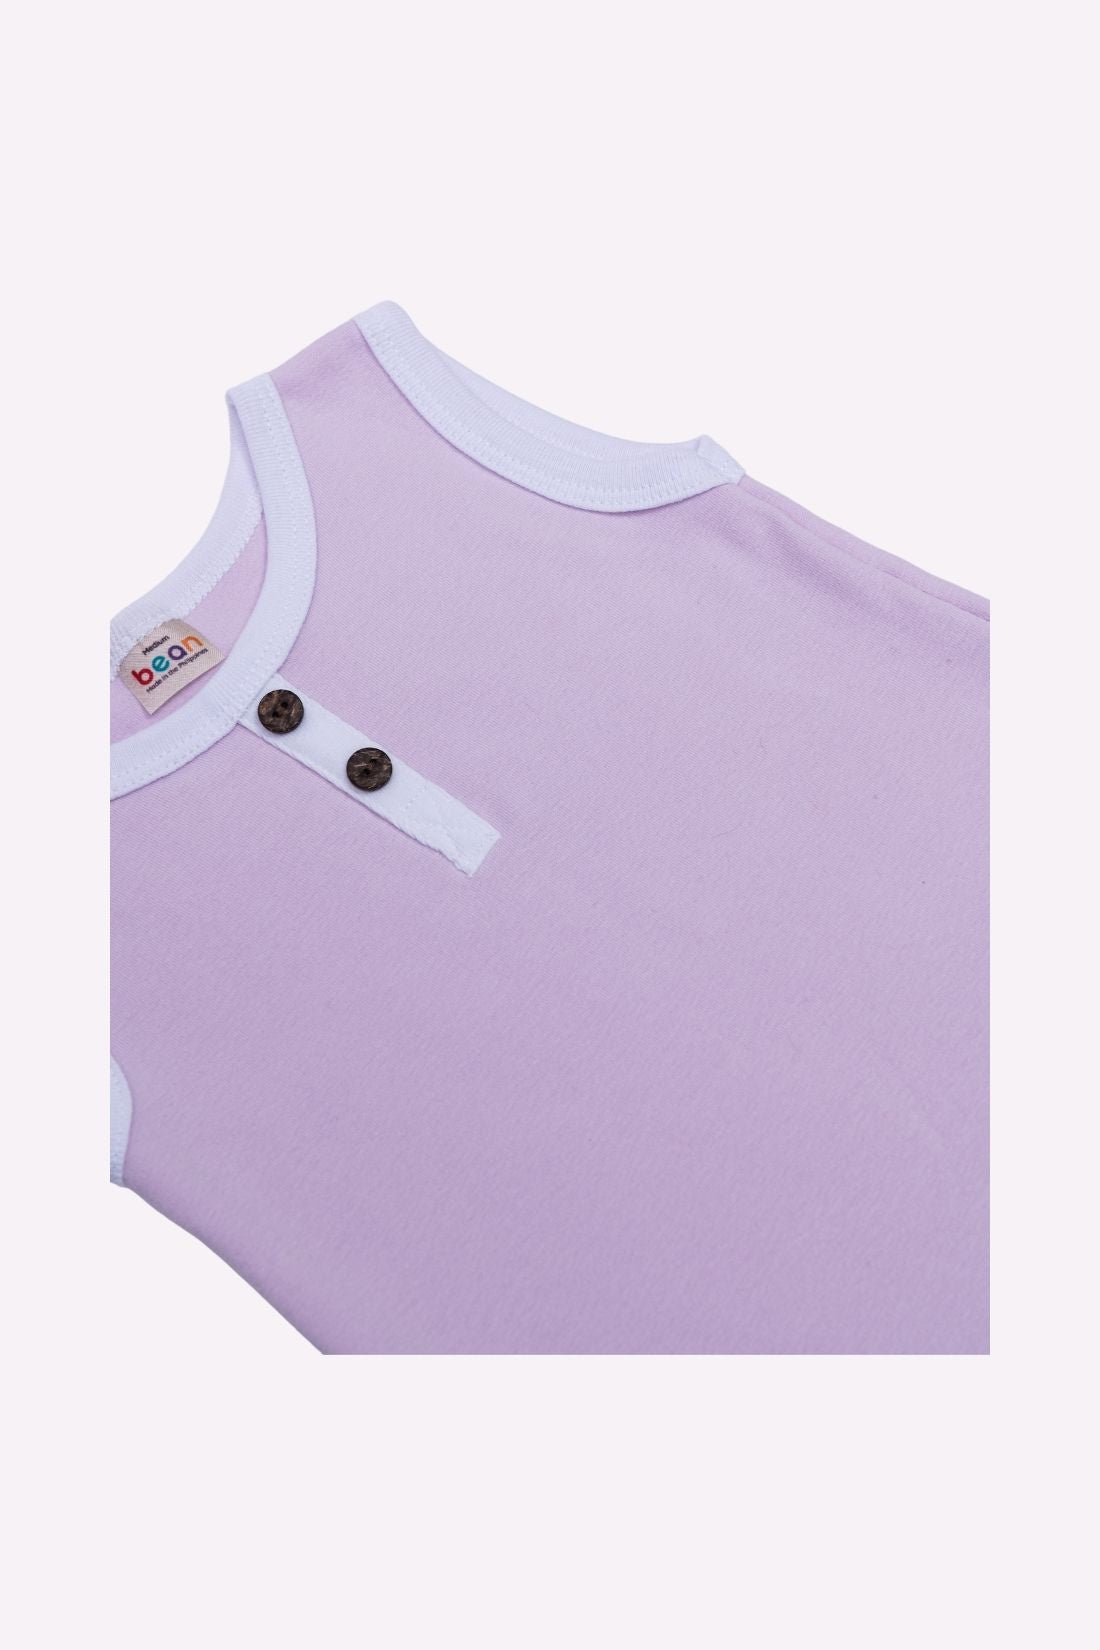 Comfy Casuals Play Sleeveless Onesie